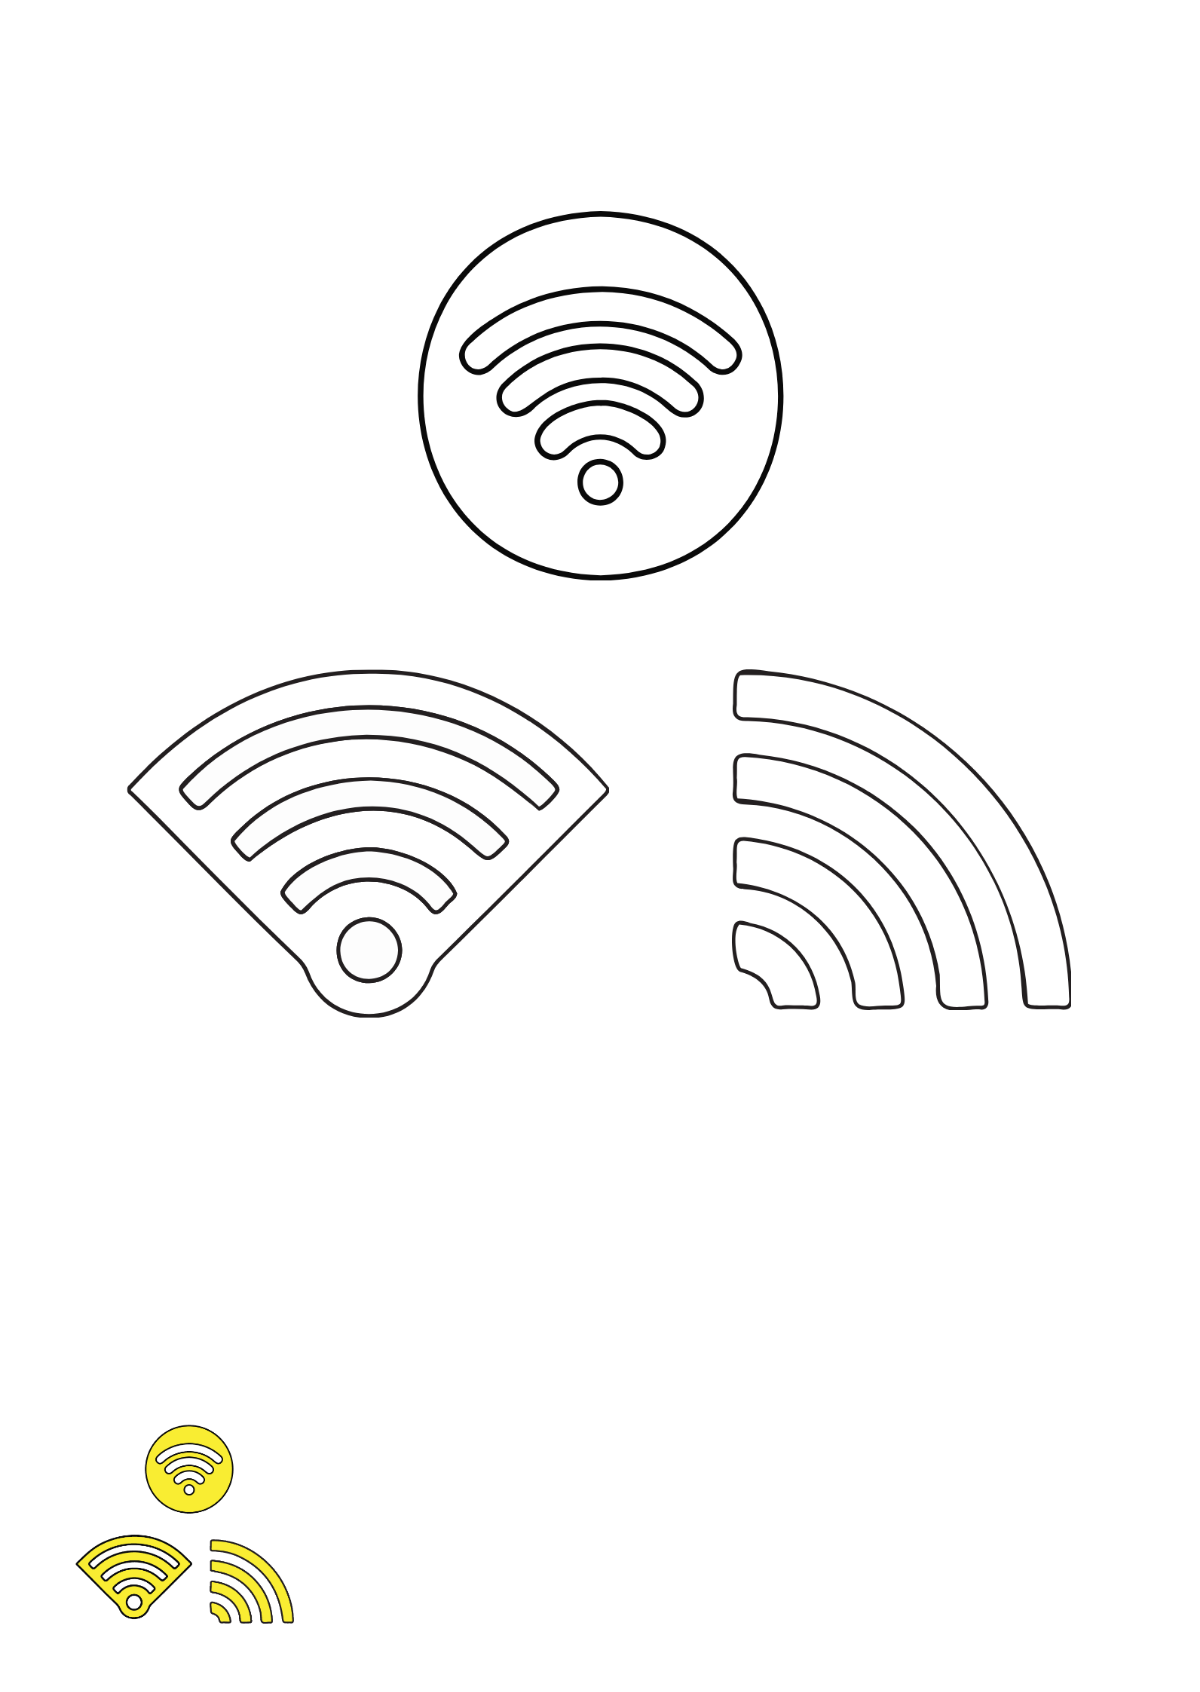 Yellow Wifi coloring page